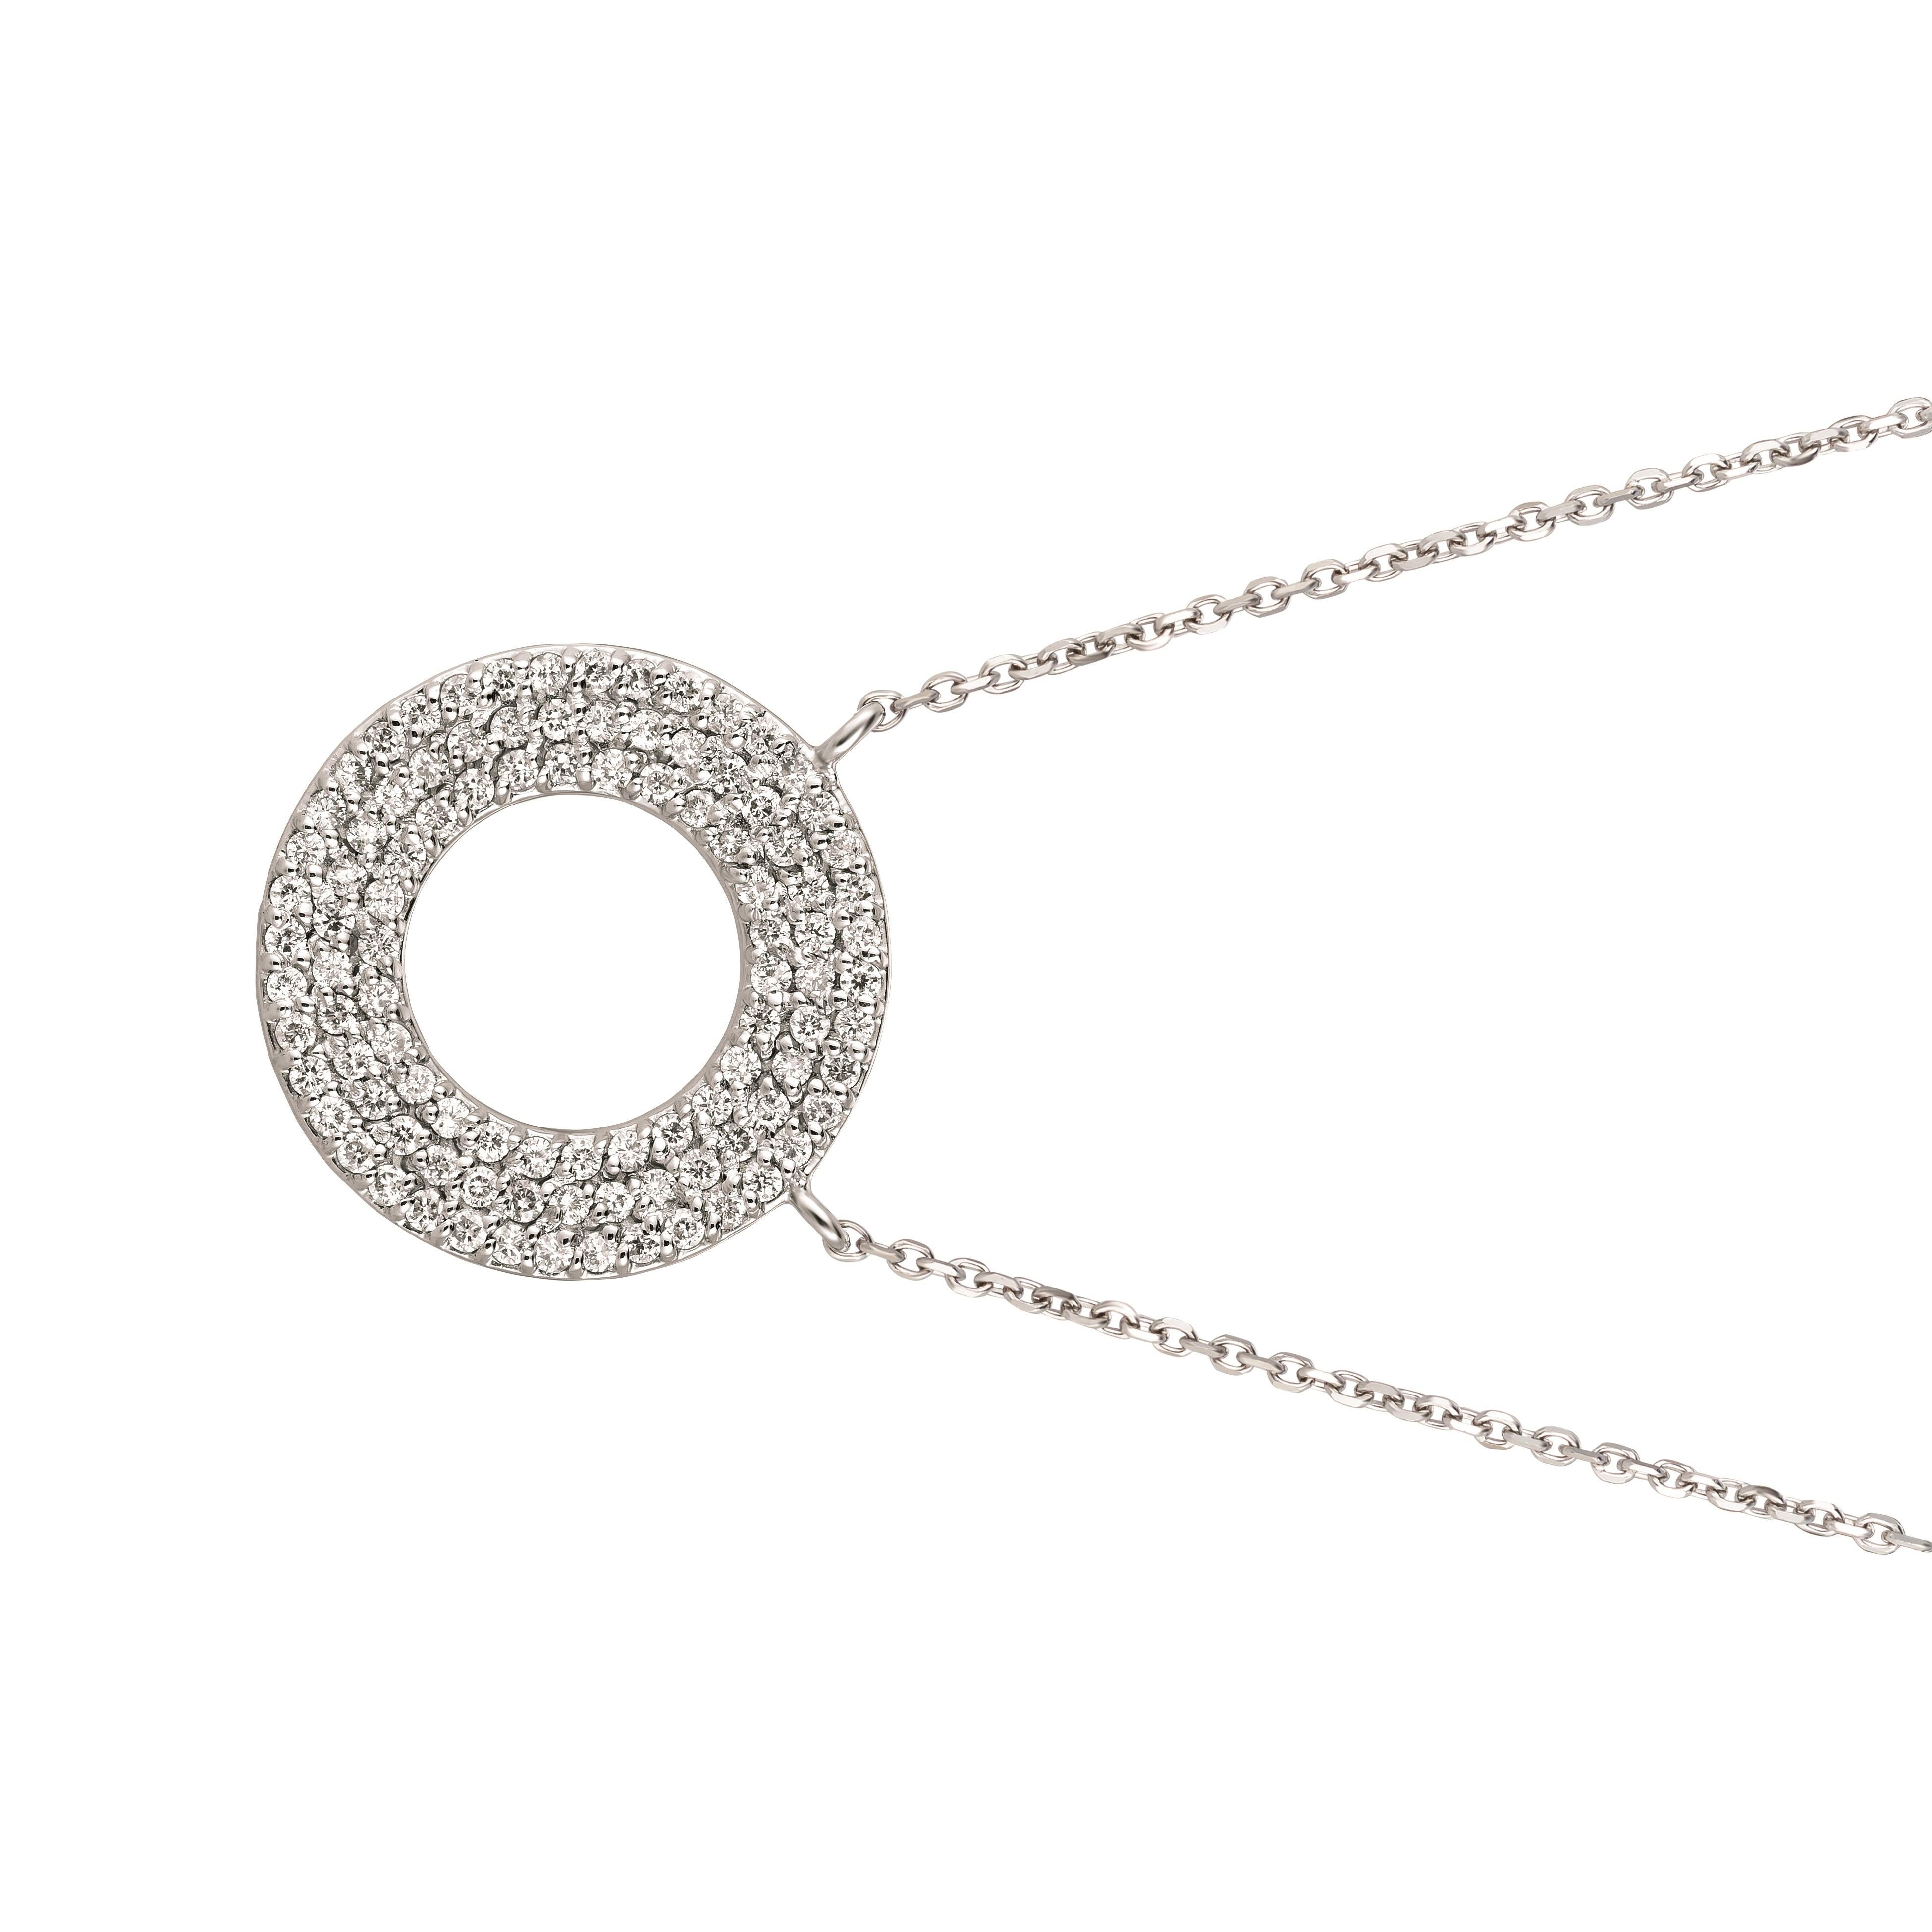 0.80 Carat Natural Diamond Circle Necklace 14K White Gold G SI 18 inches chain

100% Natural Diamonds, Not Enhanced in any way Round Cut Diamond Necklace
0.80CT
G-H
SI
14K White Gold, Pave style , 4.3 grams
3/4 inch in height, 3/4 inch in width
99